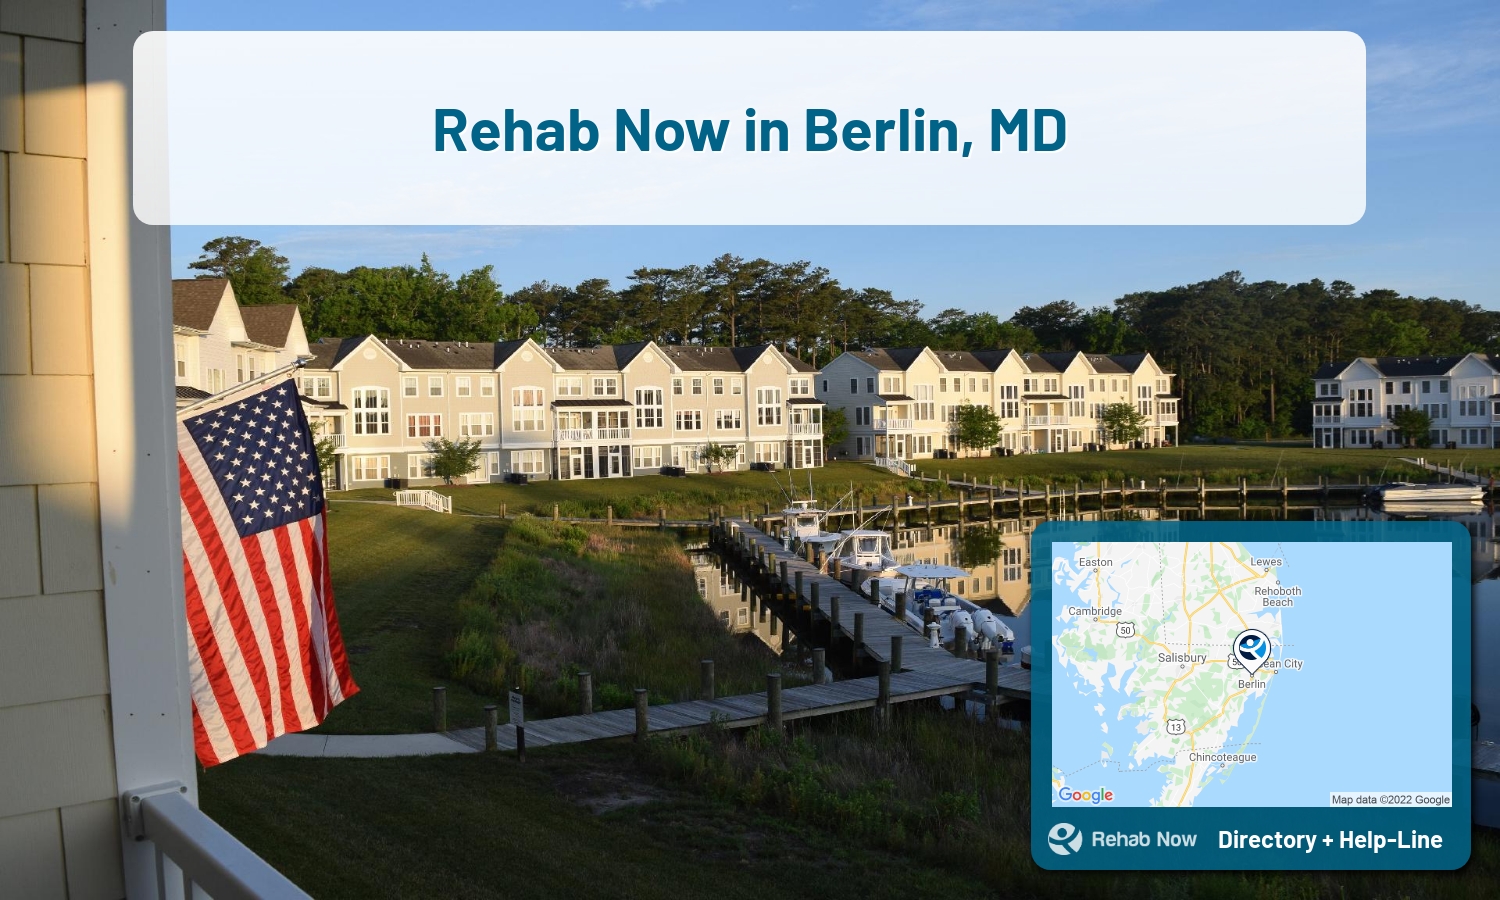 Drug rehab and alcohol treatment services nearby Berlin, MD. Need help choosing a treatment program? Call our free hotline!